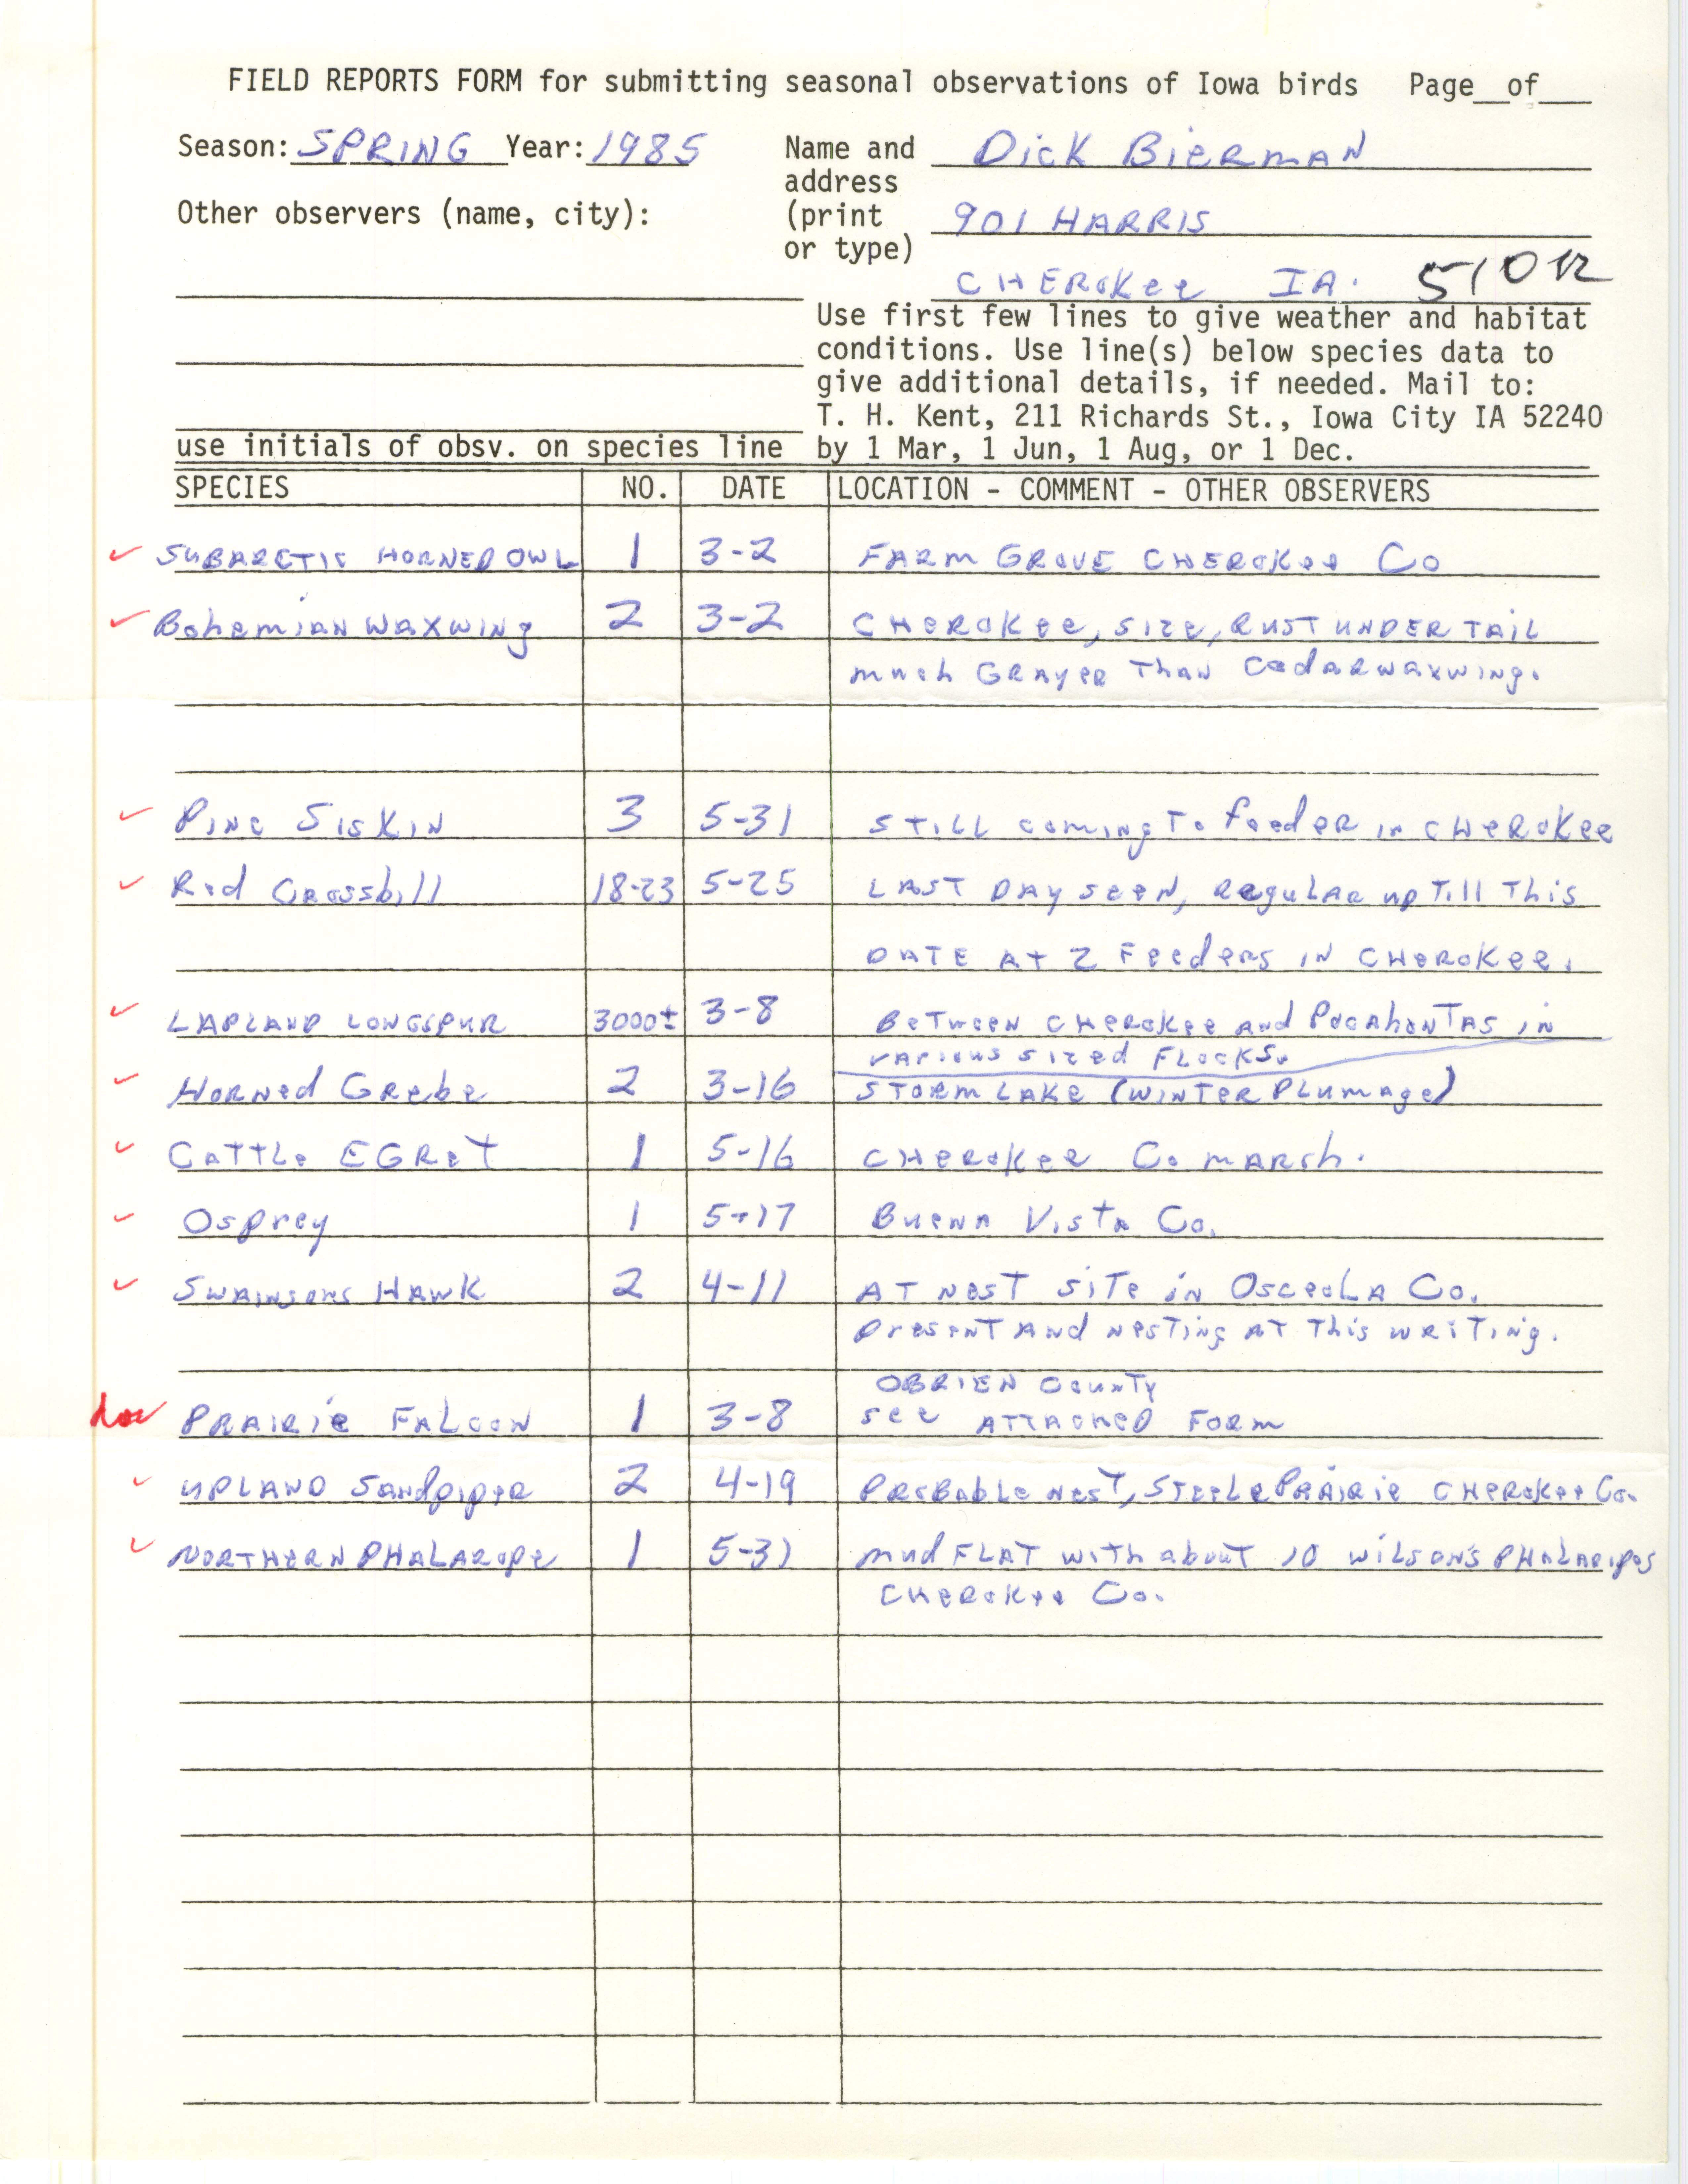 Field reports form, contributed by Dick Bierman, spring 1985